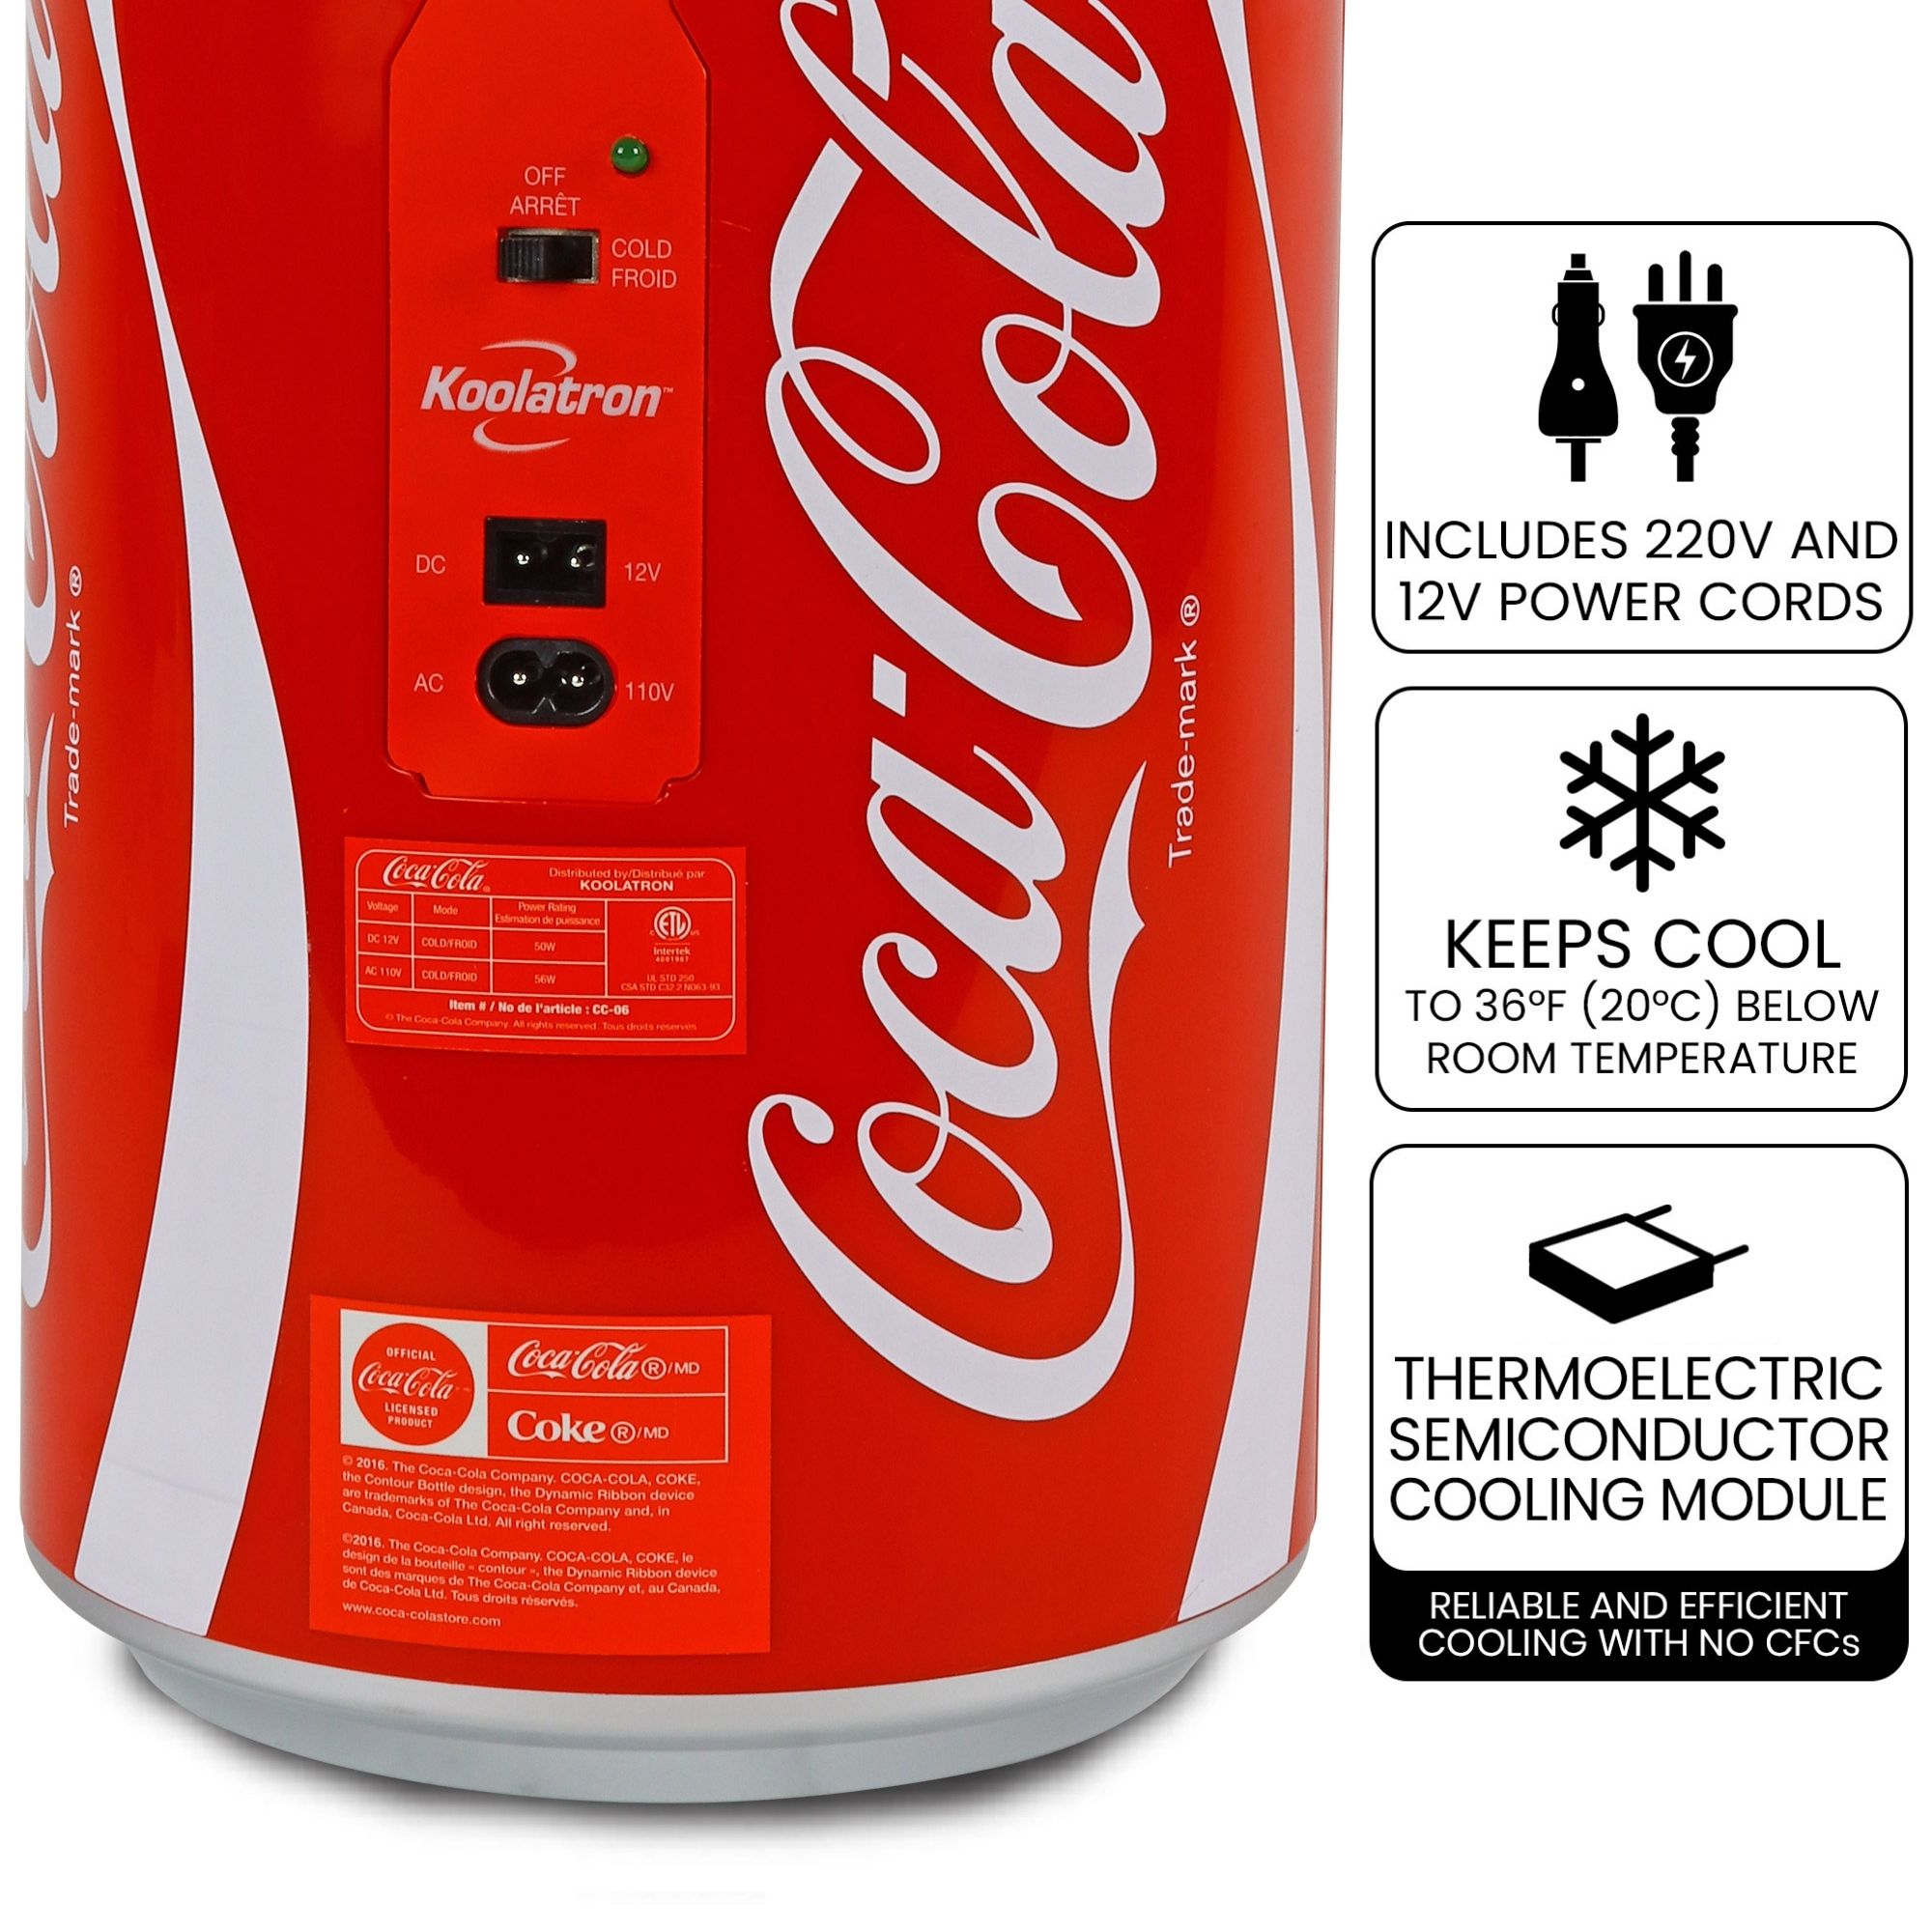 Coca-Cola 8 Can Portable Mini Fridge, 5.4L (5.7 qt) Compact Personal Travel Fridge for Snacks Lunch Drinks Cosmetics, Includes 12V and AC Cords, Cute Desk Accessory for Home Office Dorm Travel, Red - image 5 of 8